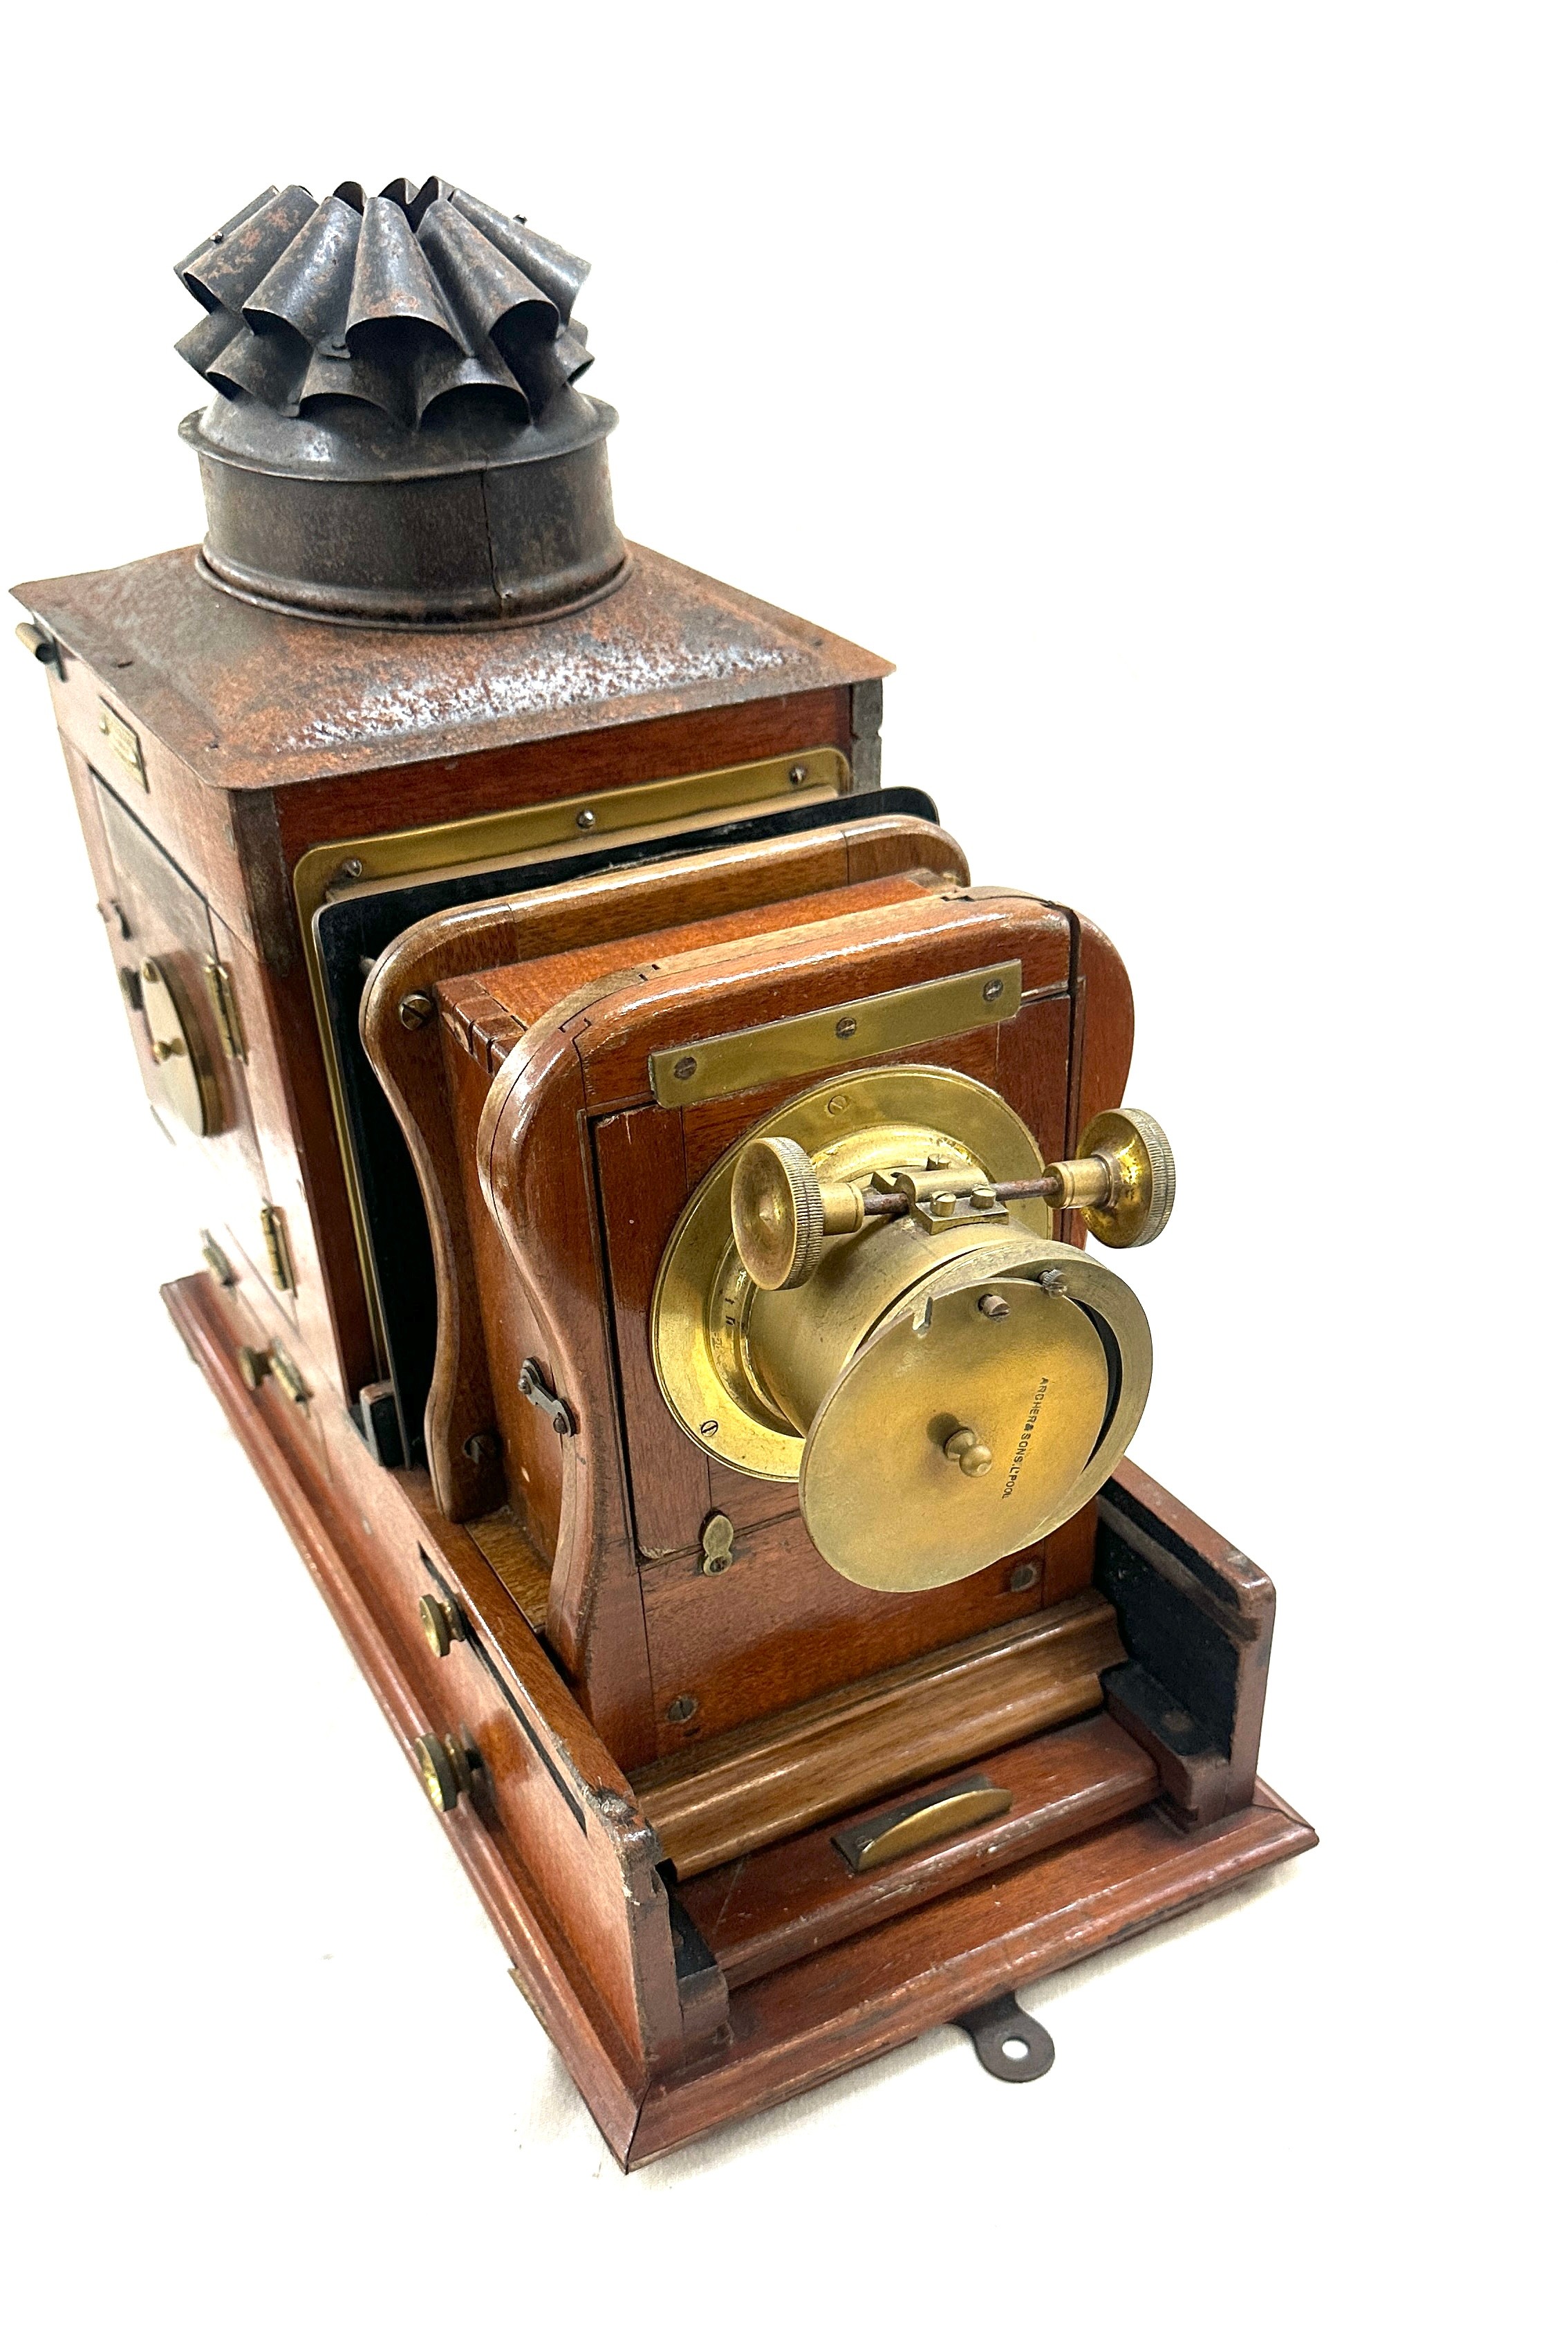 Antique mahogany magic lantern by Archer and sons Liverpool length 45cm, complete with lens - Image 2 of 8